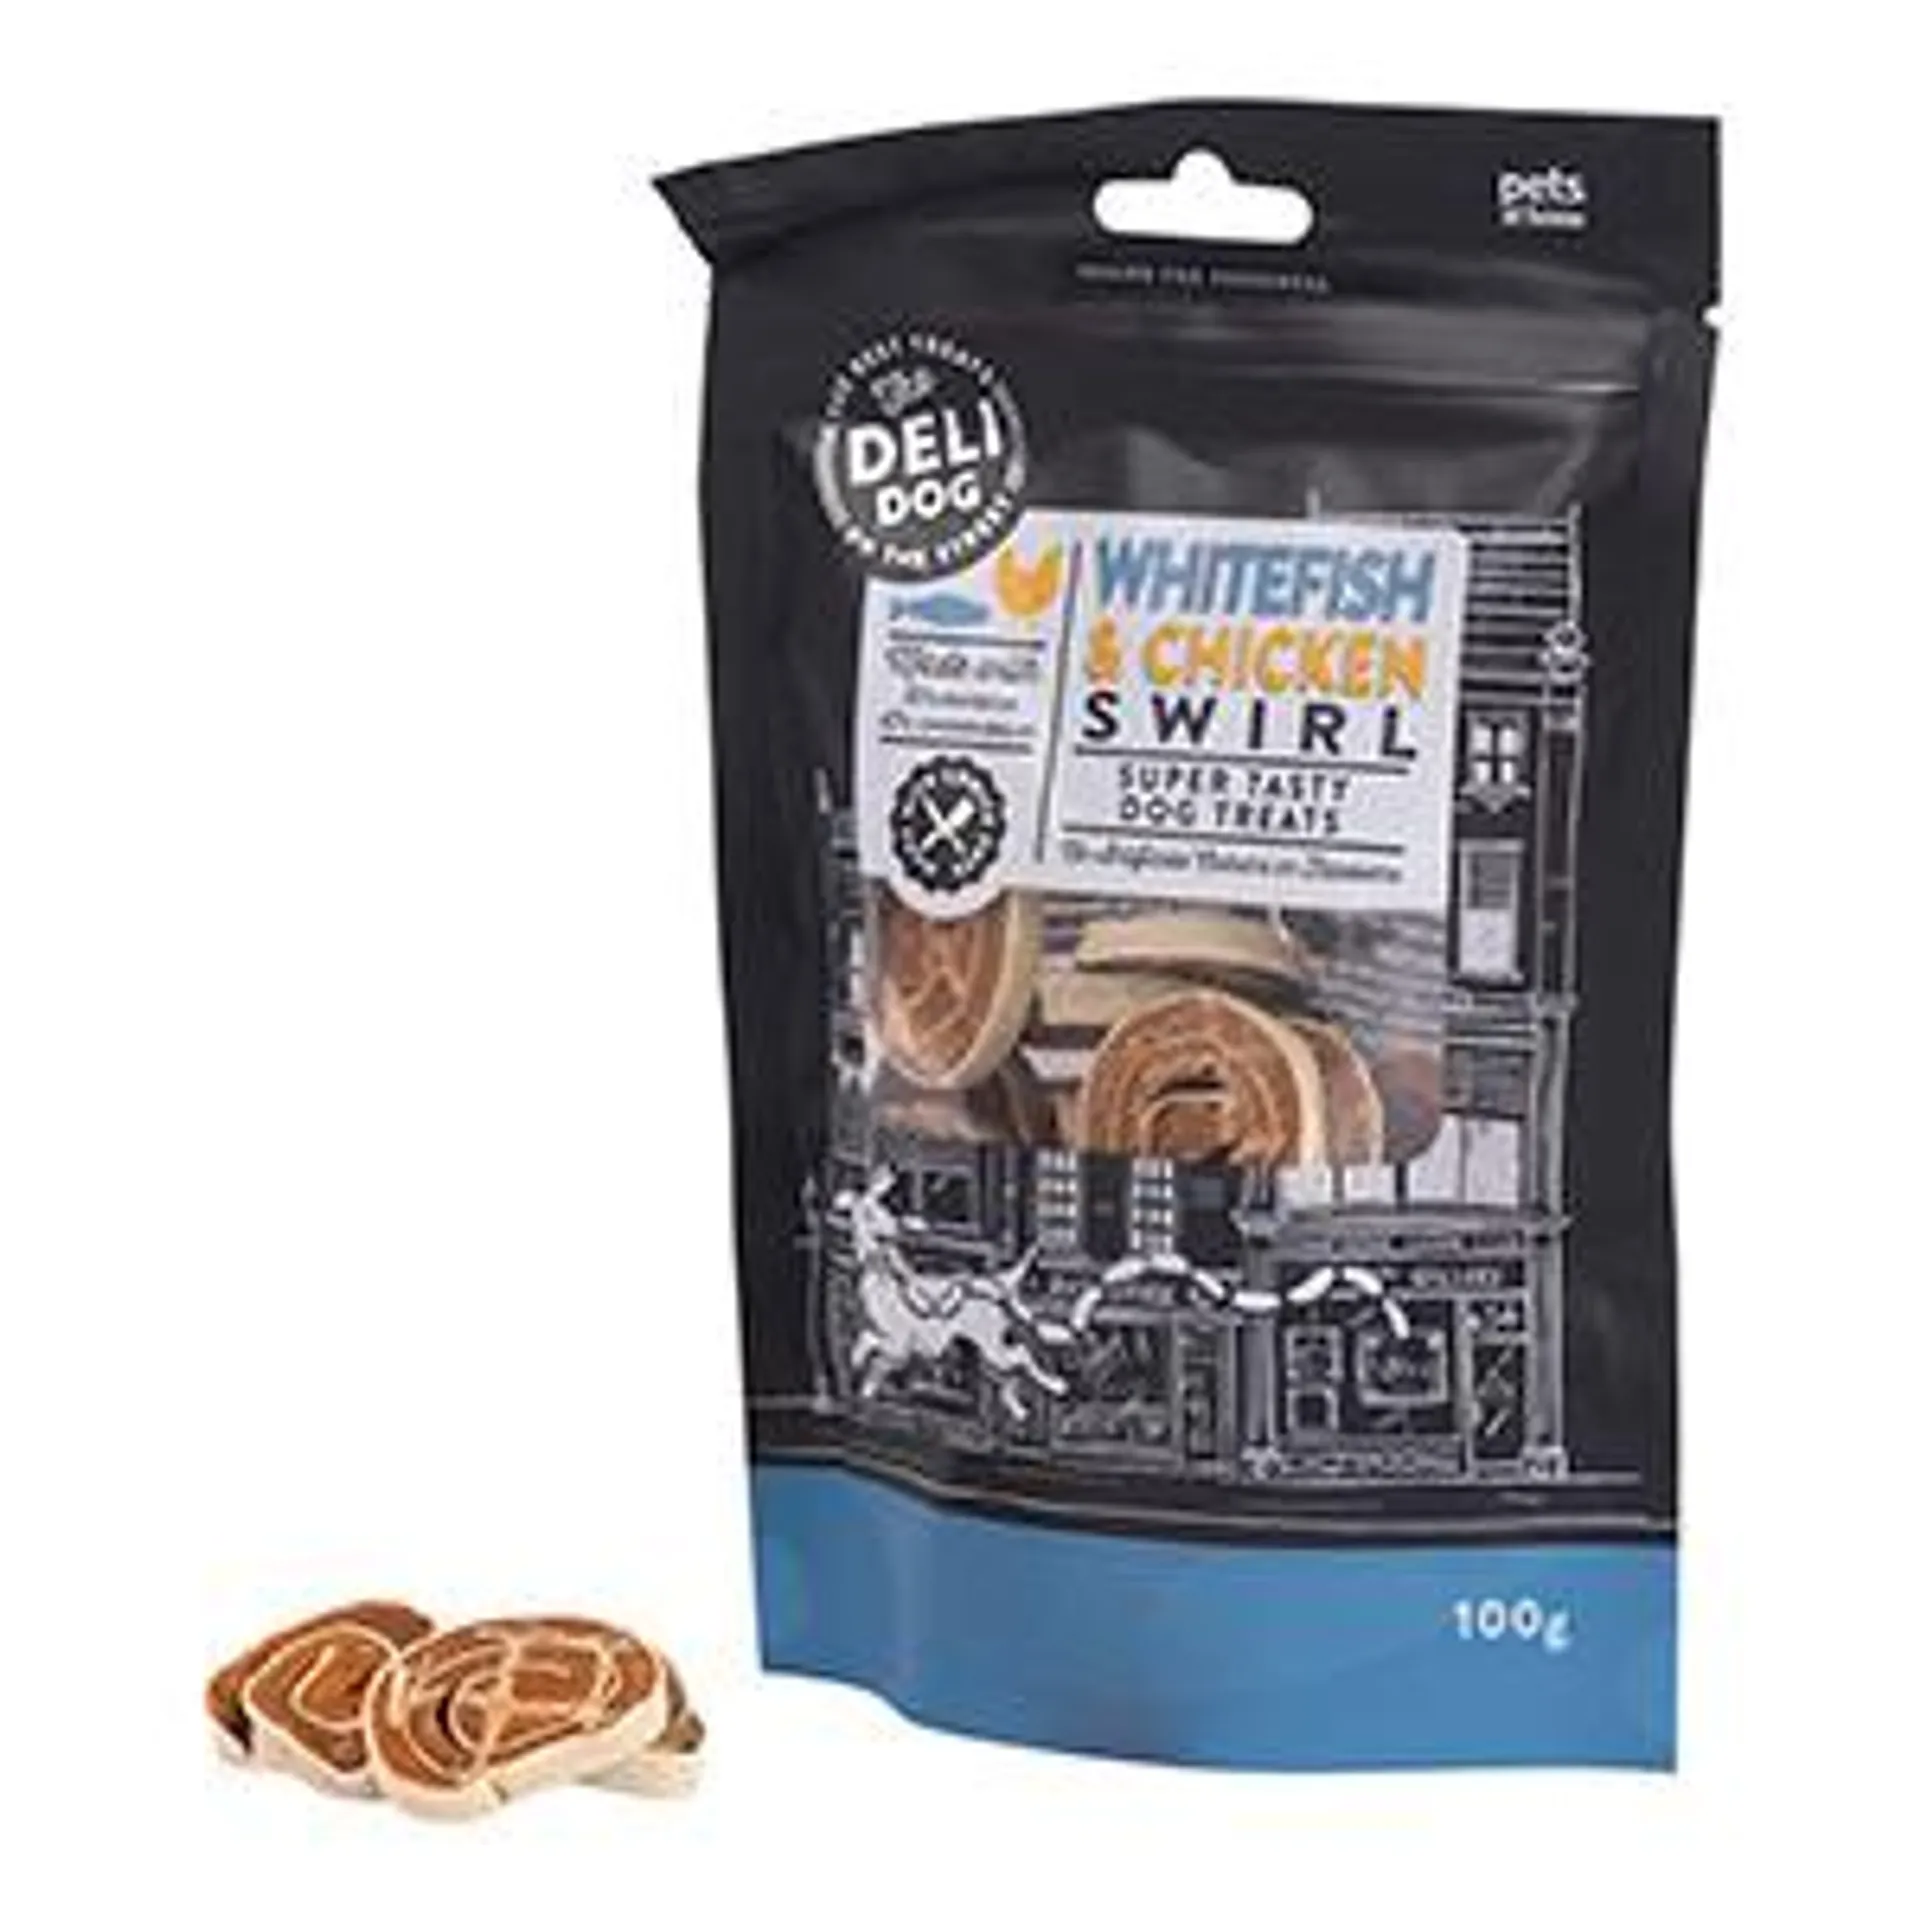 Pets at Home The Deli Dog Whitefish and Chicken Swirls Adult Dog Treats 100g